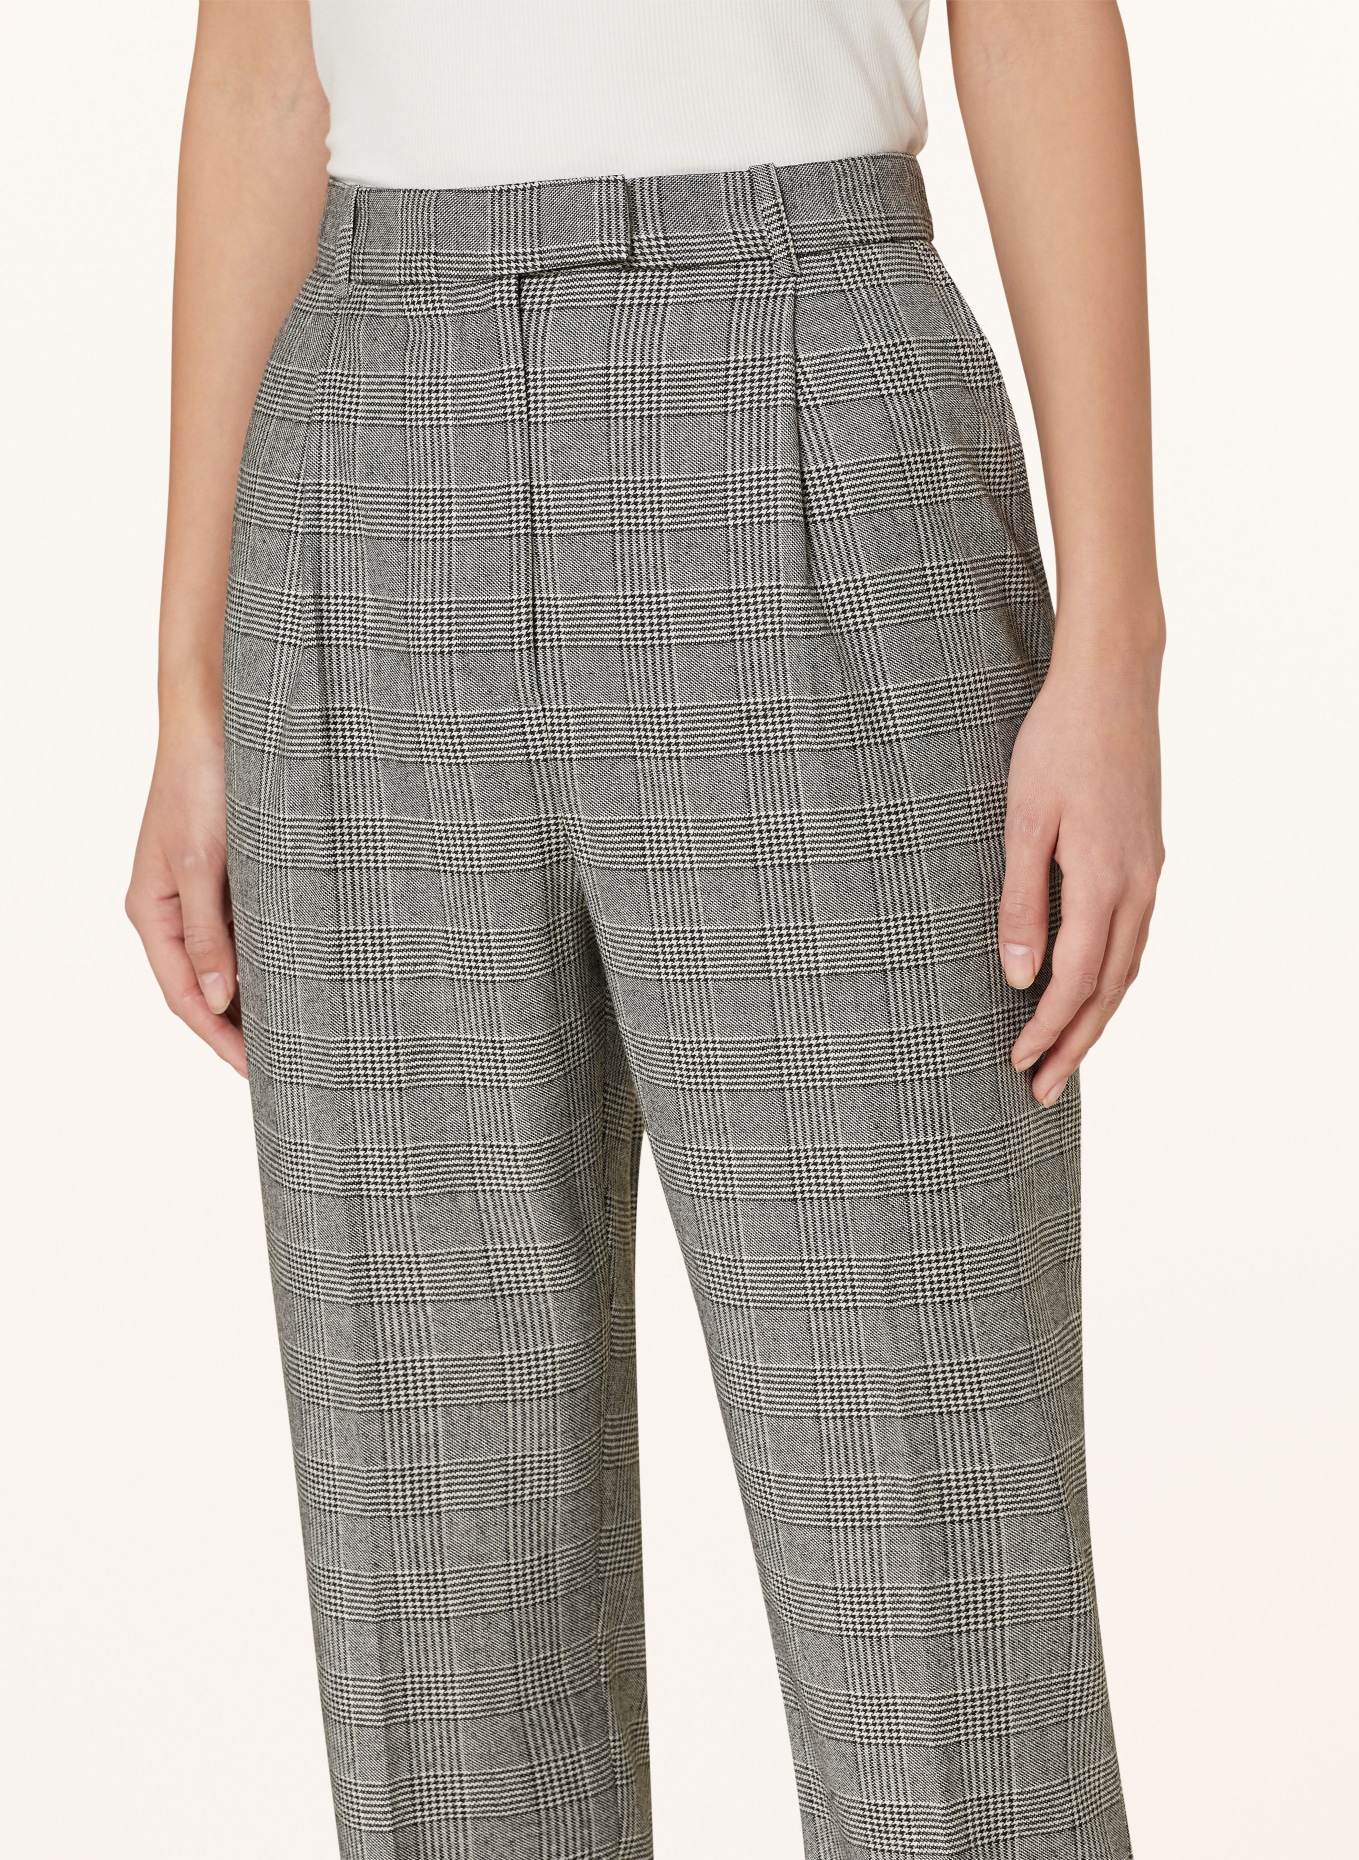 TED BAKER Trousers JOMMIAL, Color: GRAY/ LIGHT GRAY/ BLACK (Image 5)